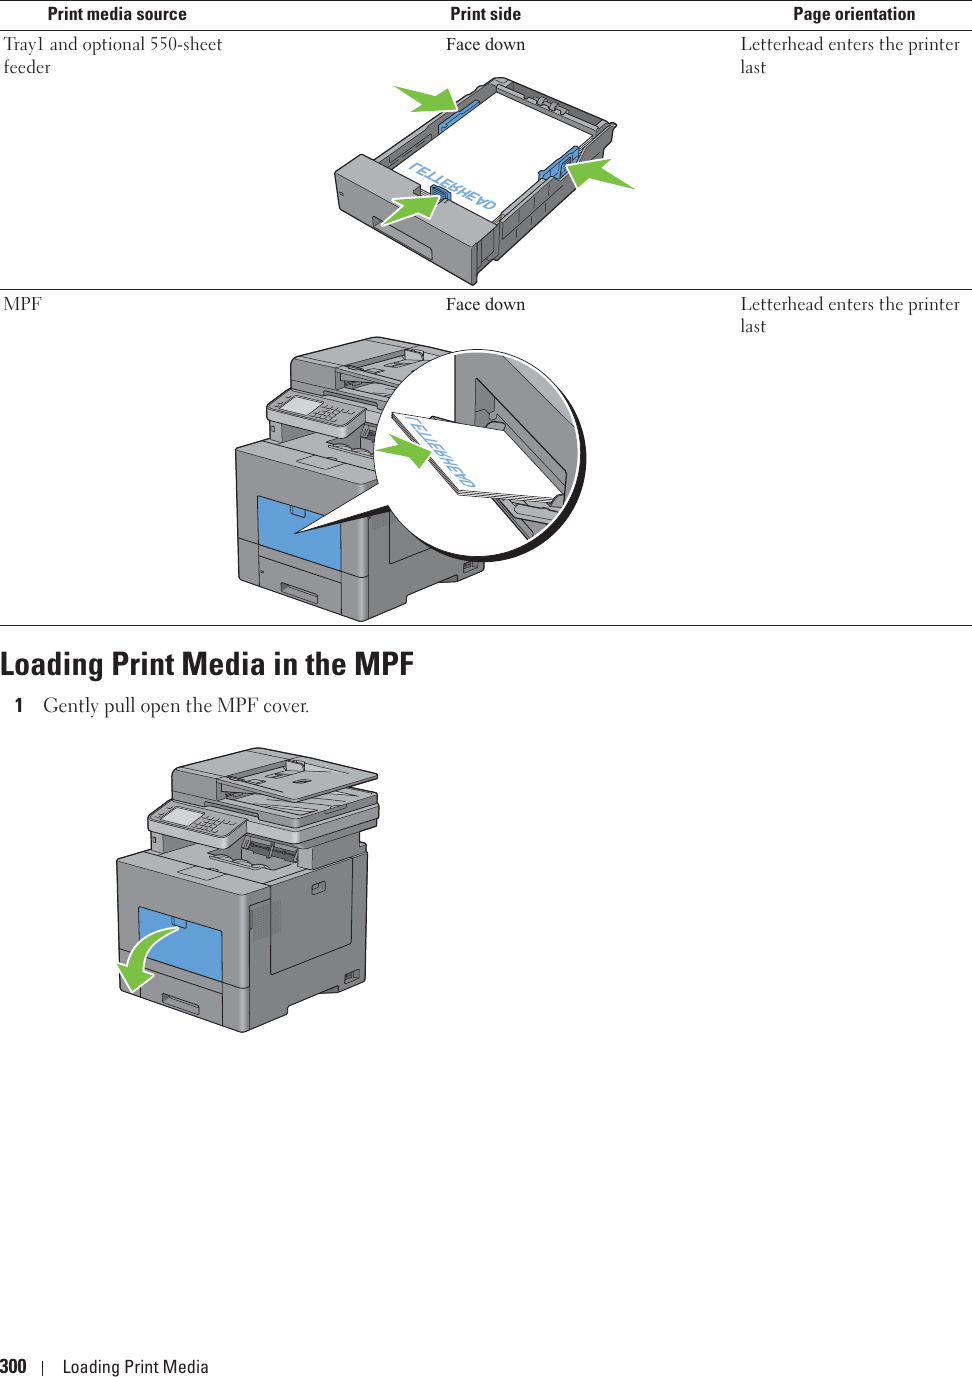 300 Loading Print MediaLoading Print Media in the MPF1Gently pull open the MPF cover.Print media source Print side Page orientationTray1 and optional 550-sheet feederFace down Letterhead enters the printer lastMPF Face down Letterhead enters the printer lastLETTERHEADLETTERHEAD